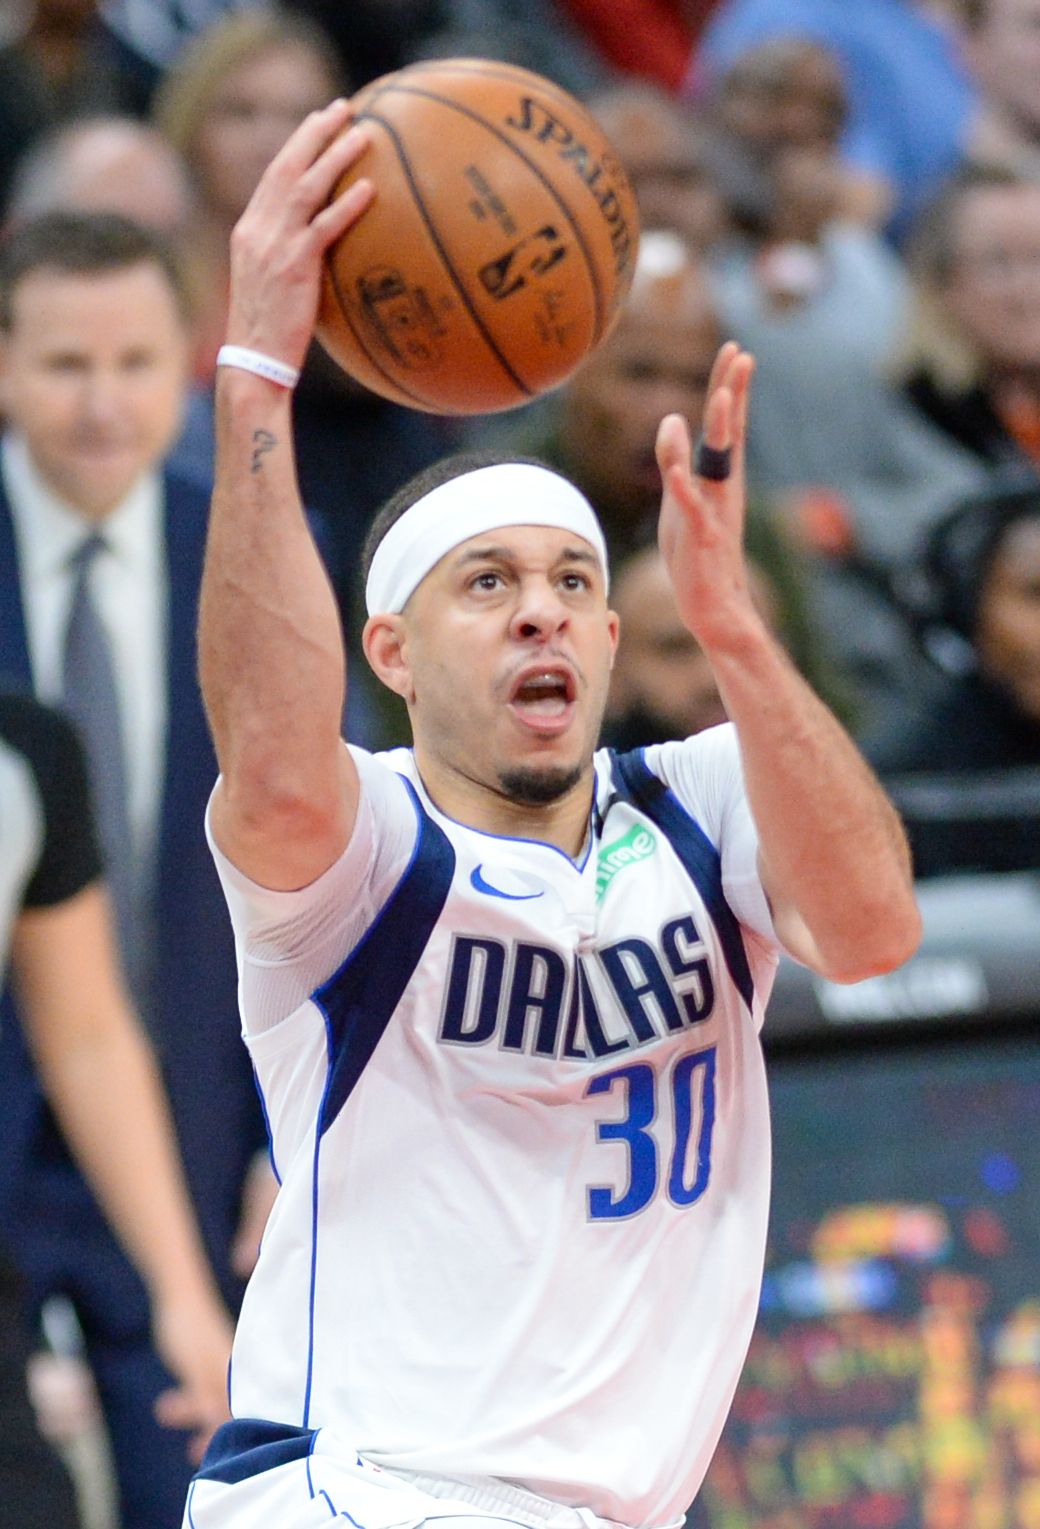 Stephen Currys Brother Seth Curry: What is his net worth?